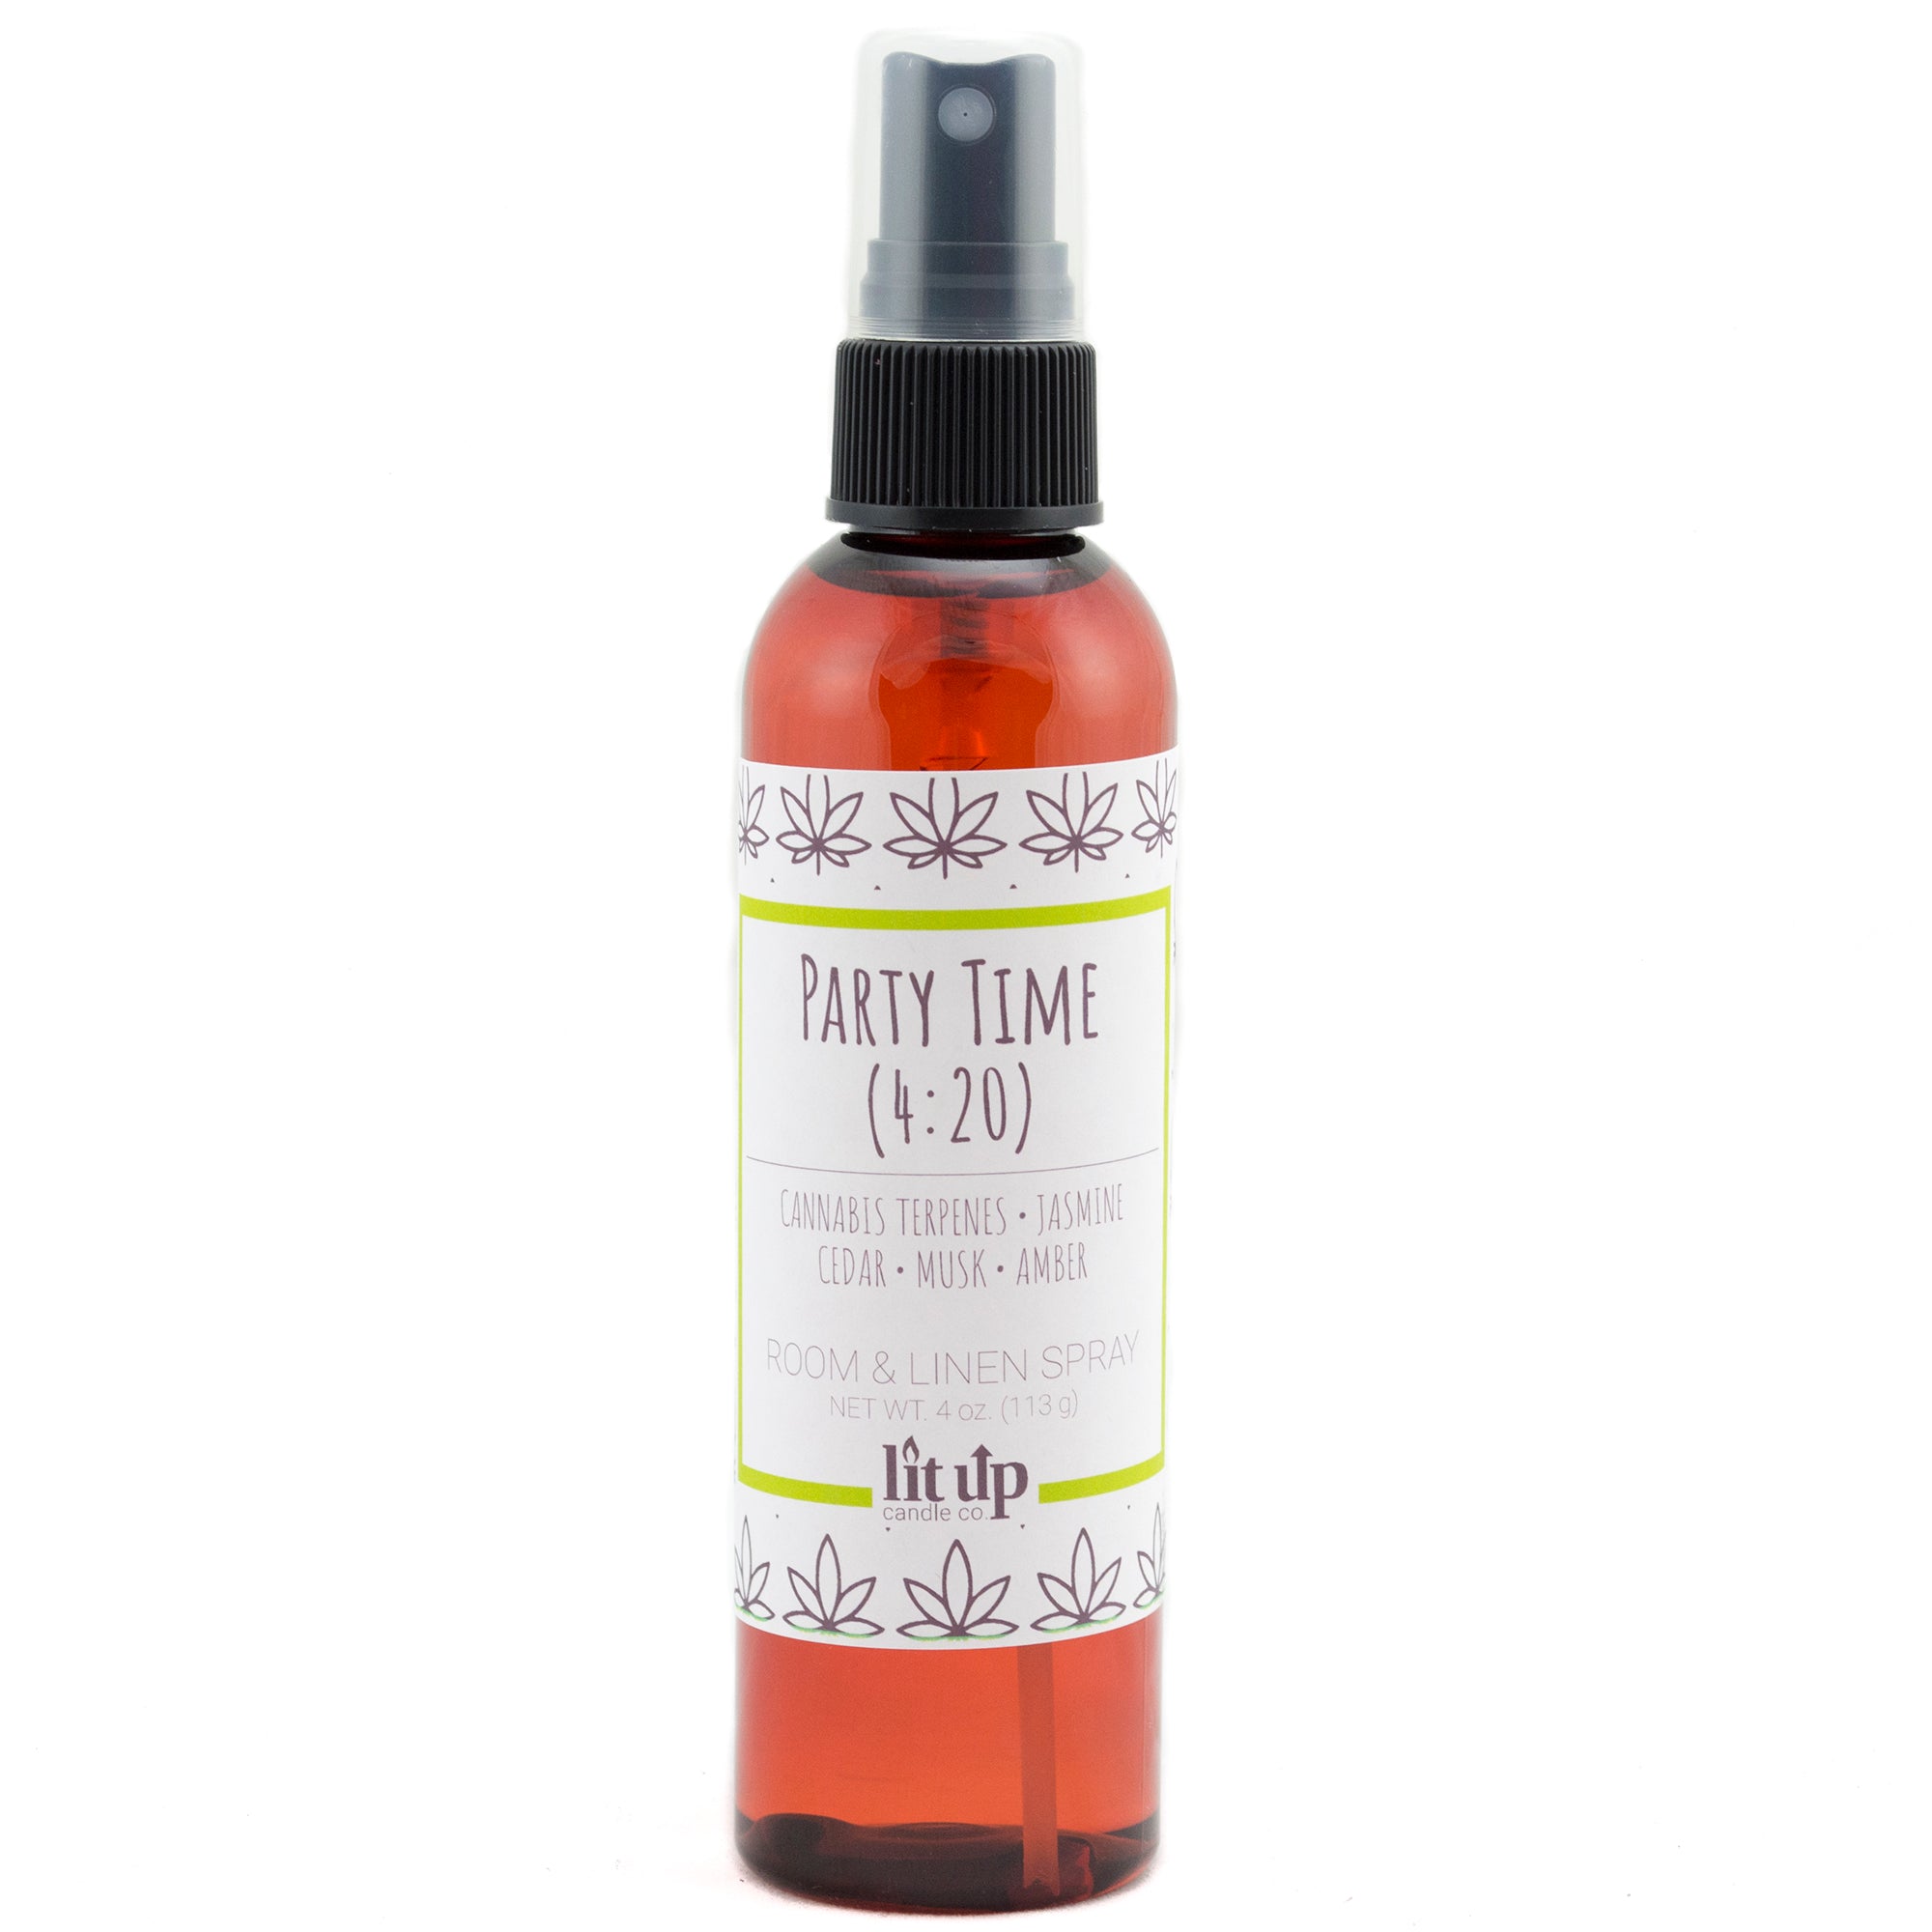 Party Time (4:20) scented 4 oz. room & linen spray - FKA Cannabis Flower